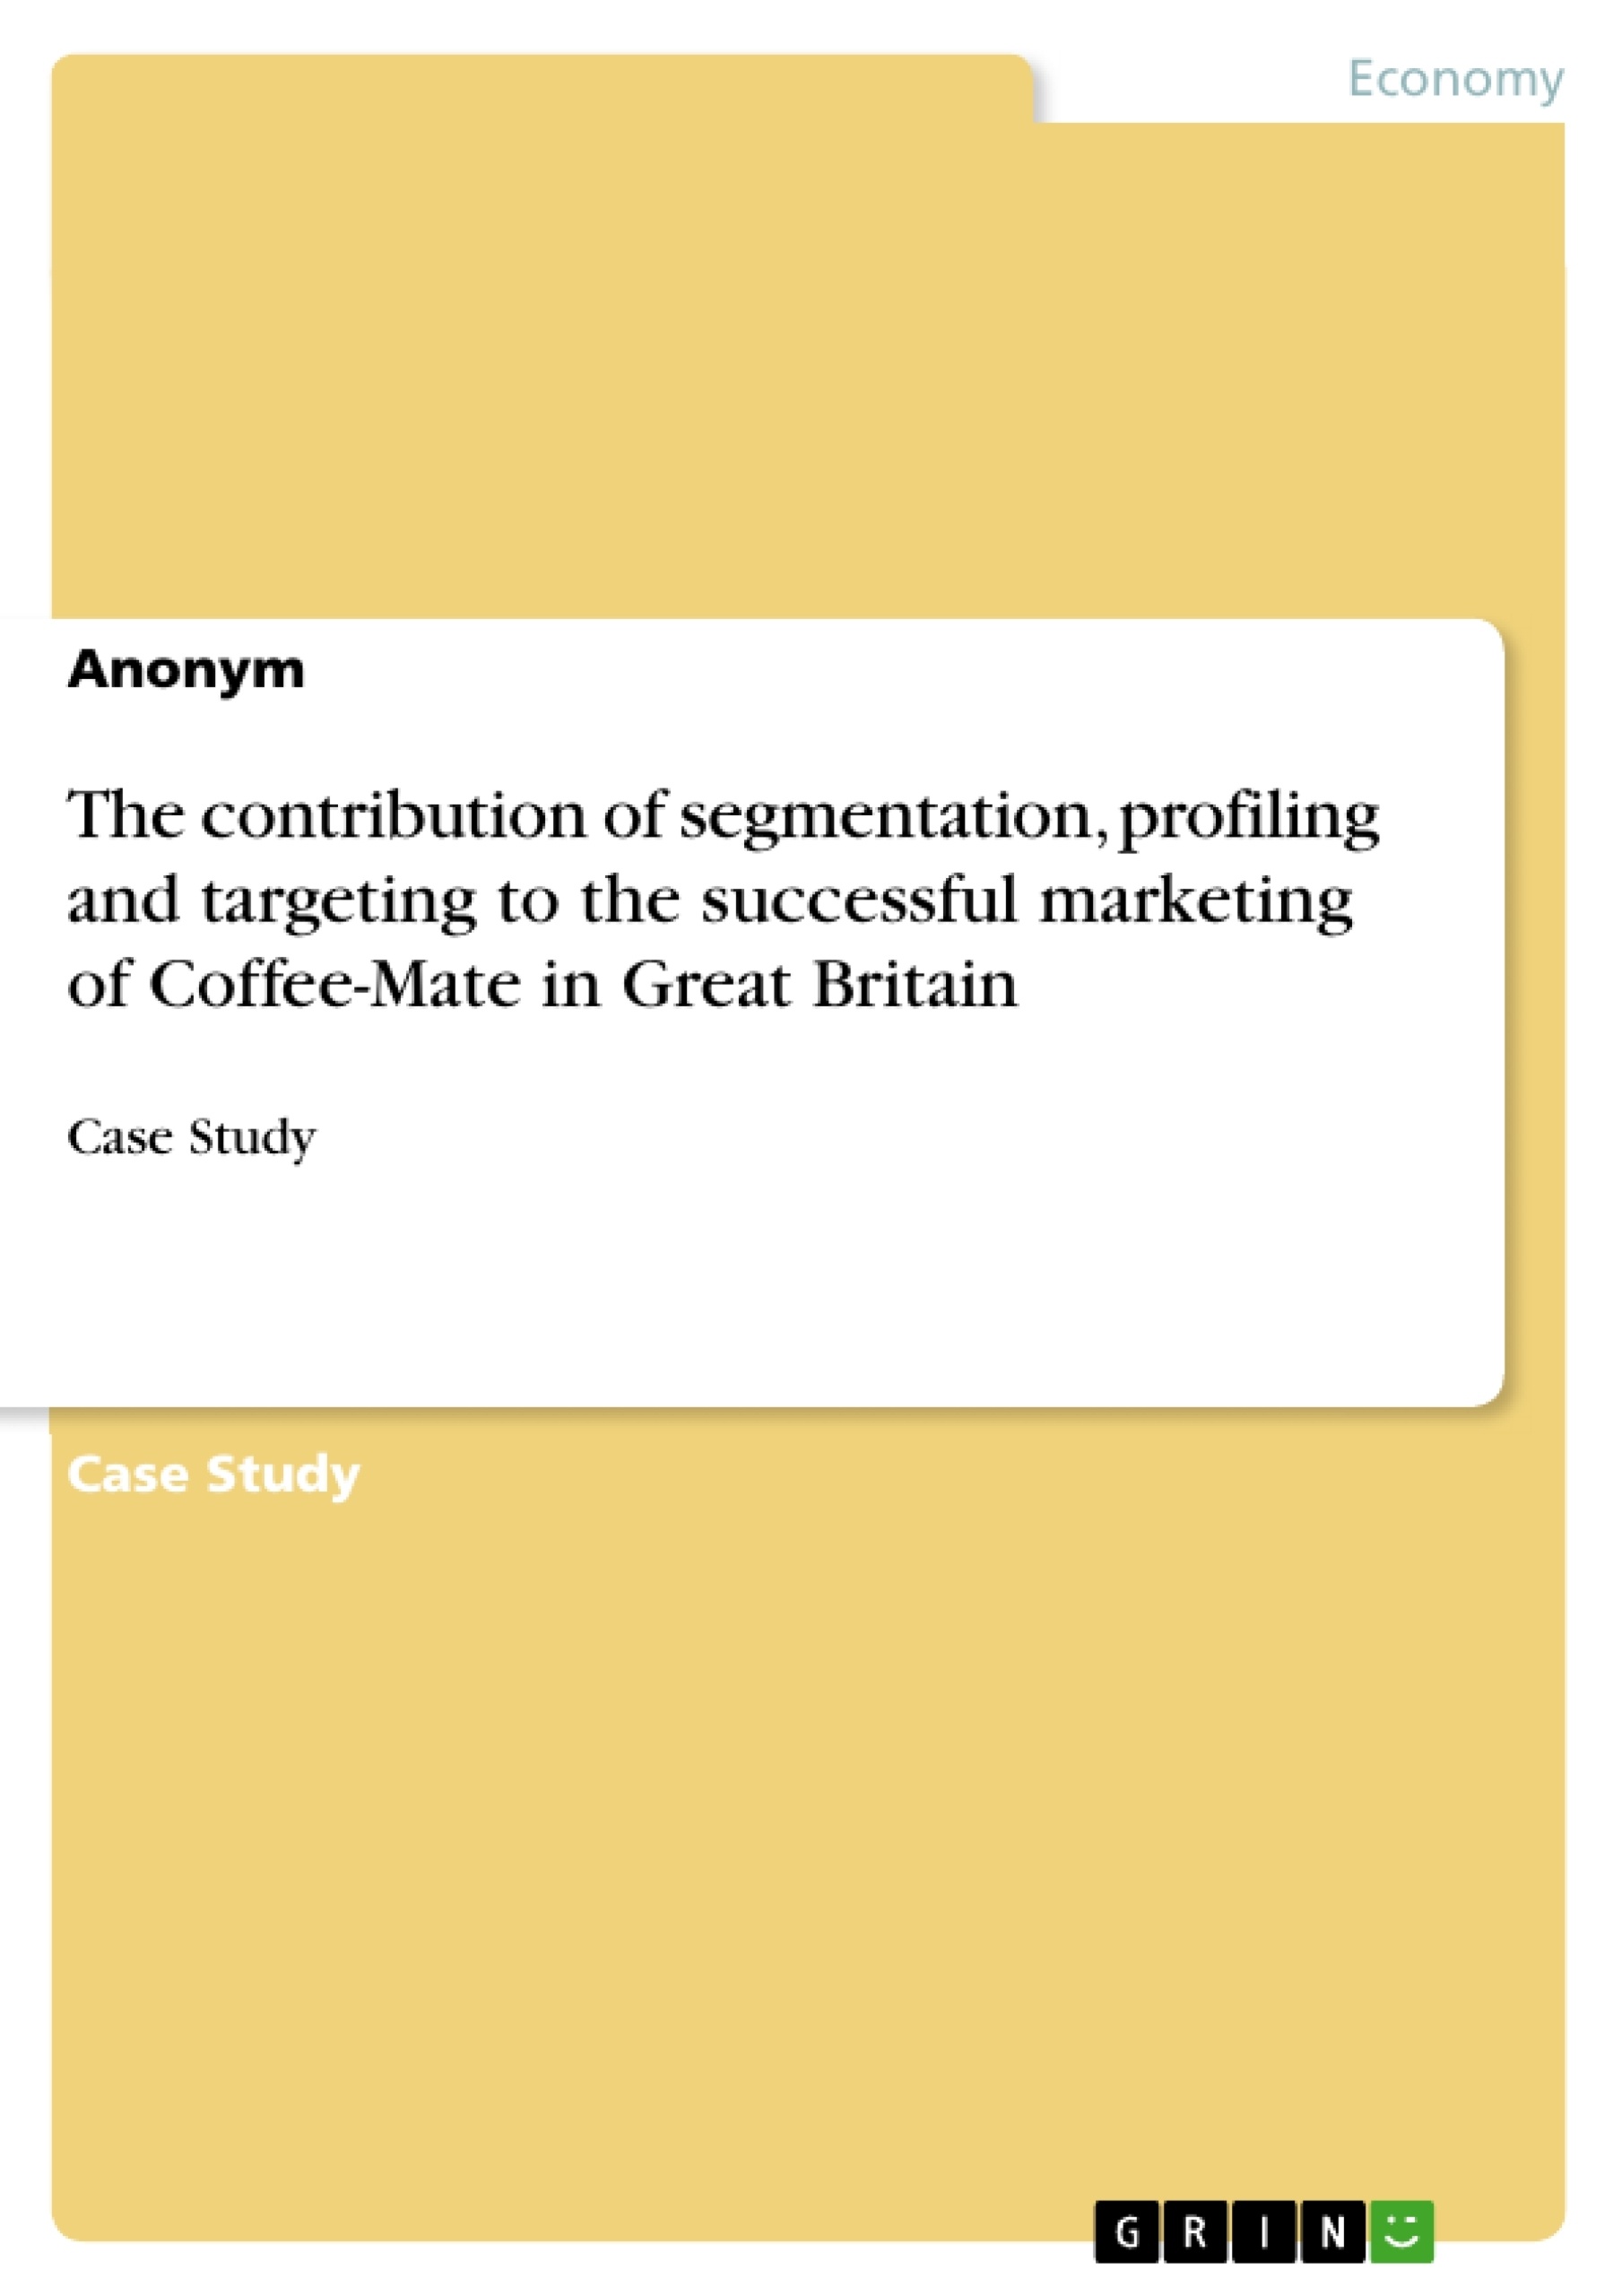 Title: The contribution of segmentation, profiling and targeting to the successful marketing of Coffee-Mate in Great Britain